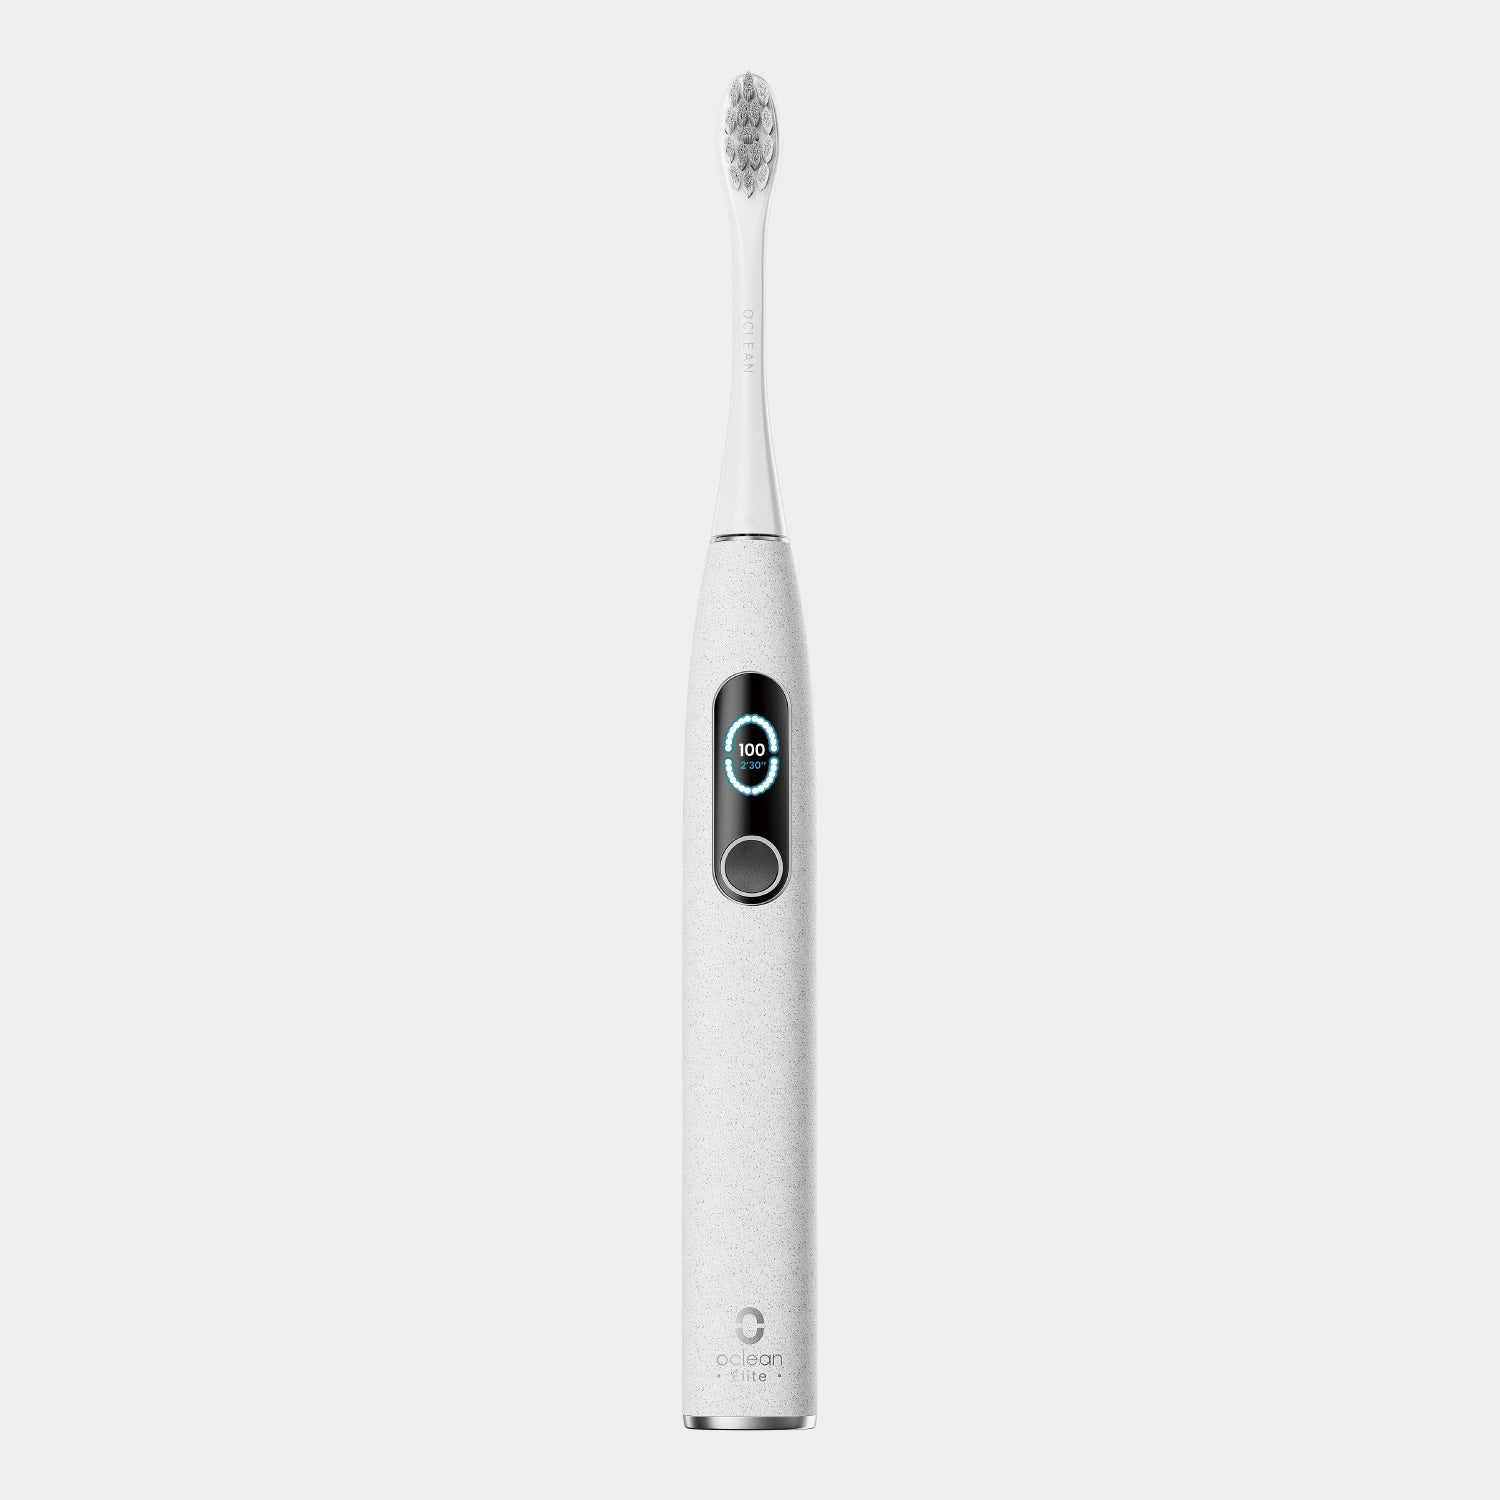 Oclean X Pro Elite-Toothbrushes-Oclean US Store